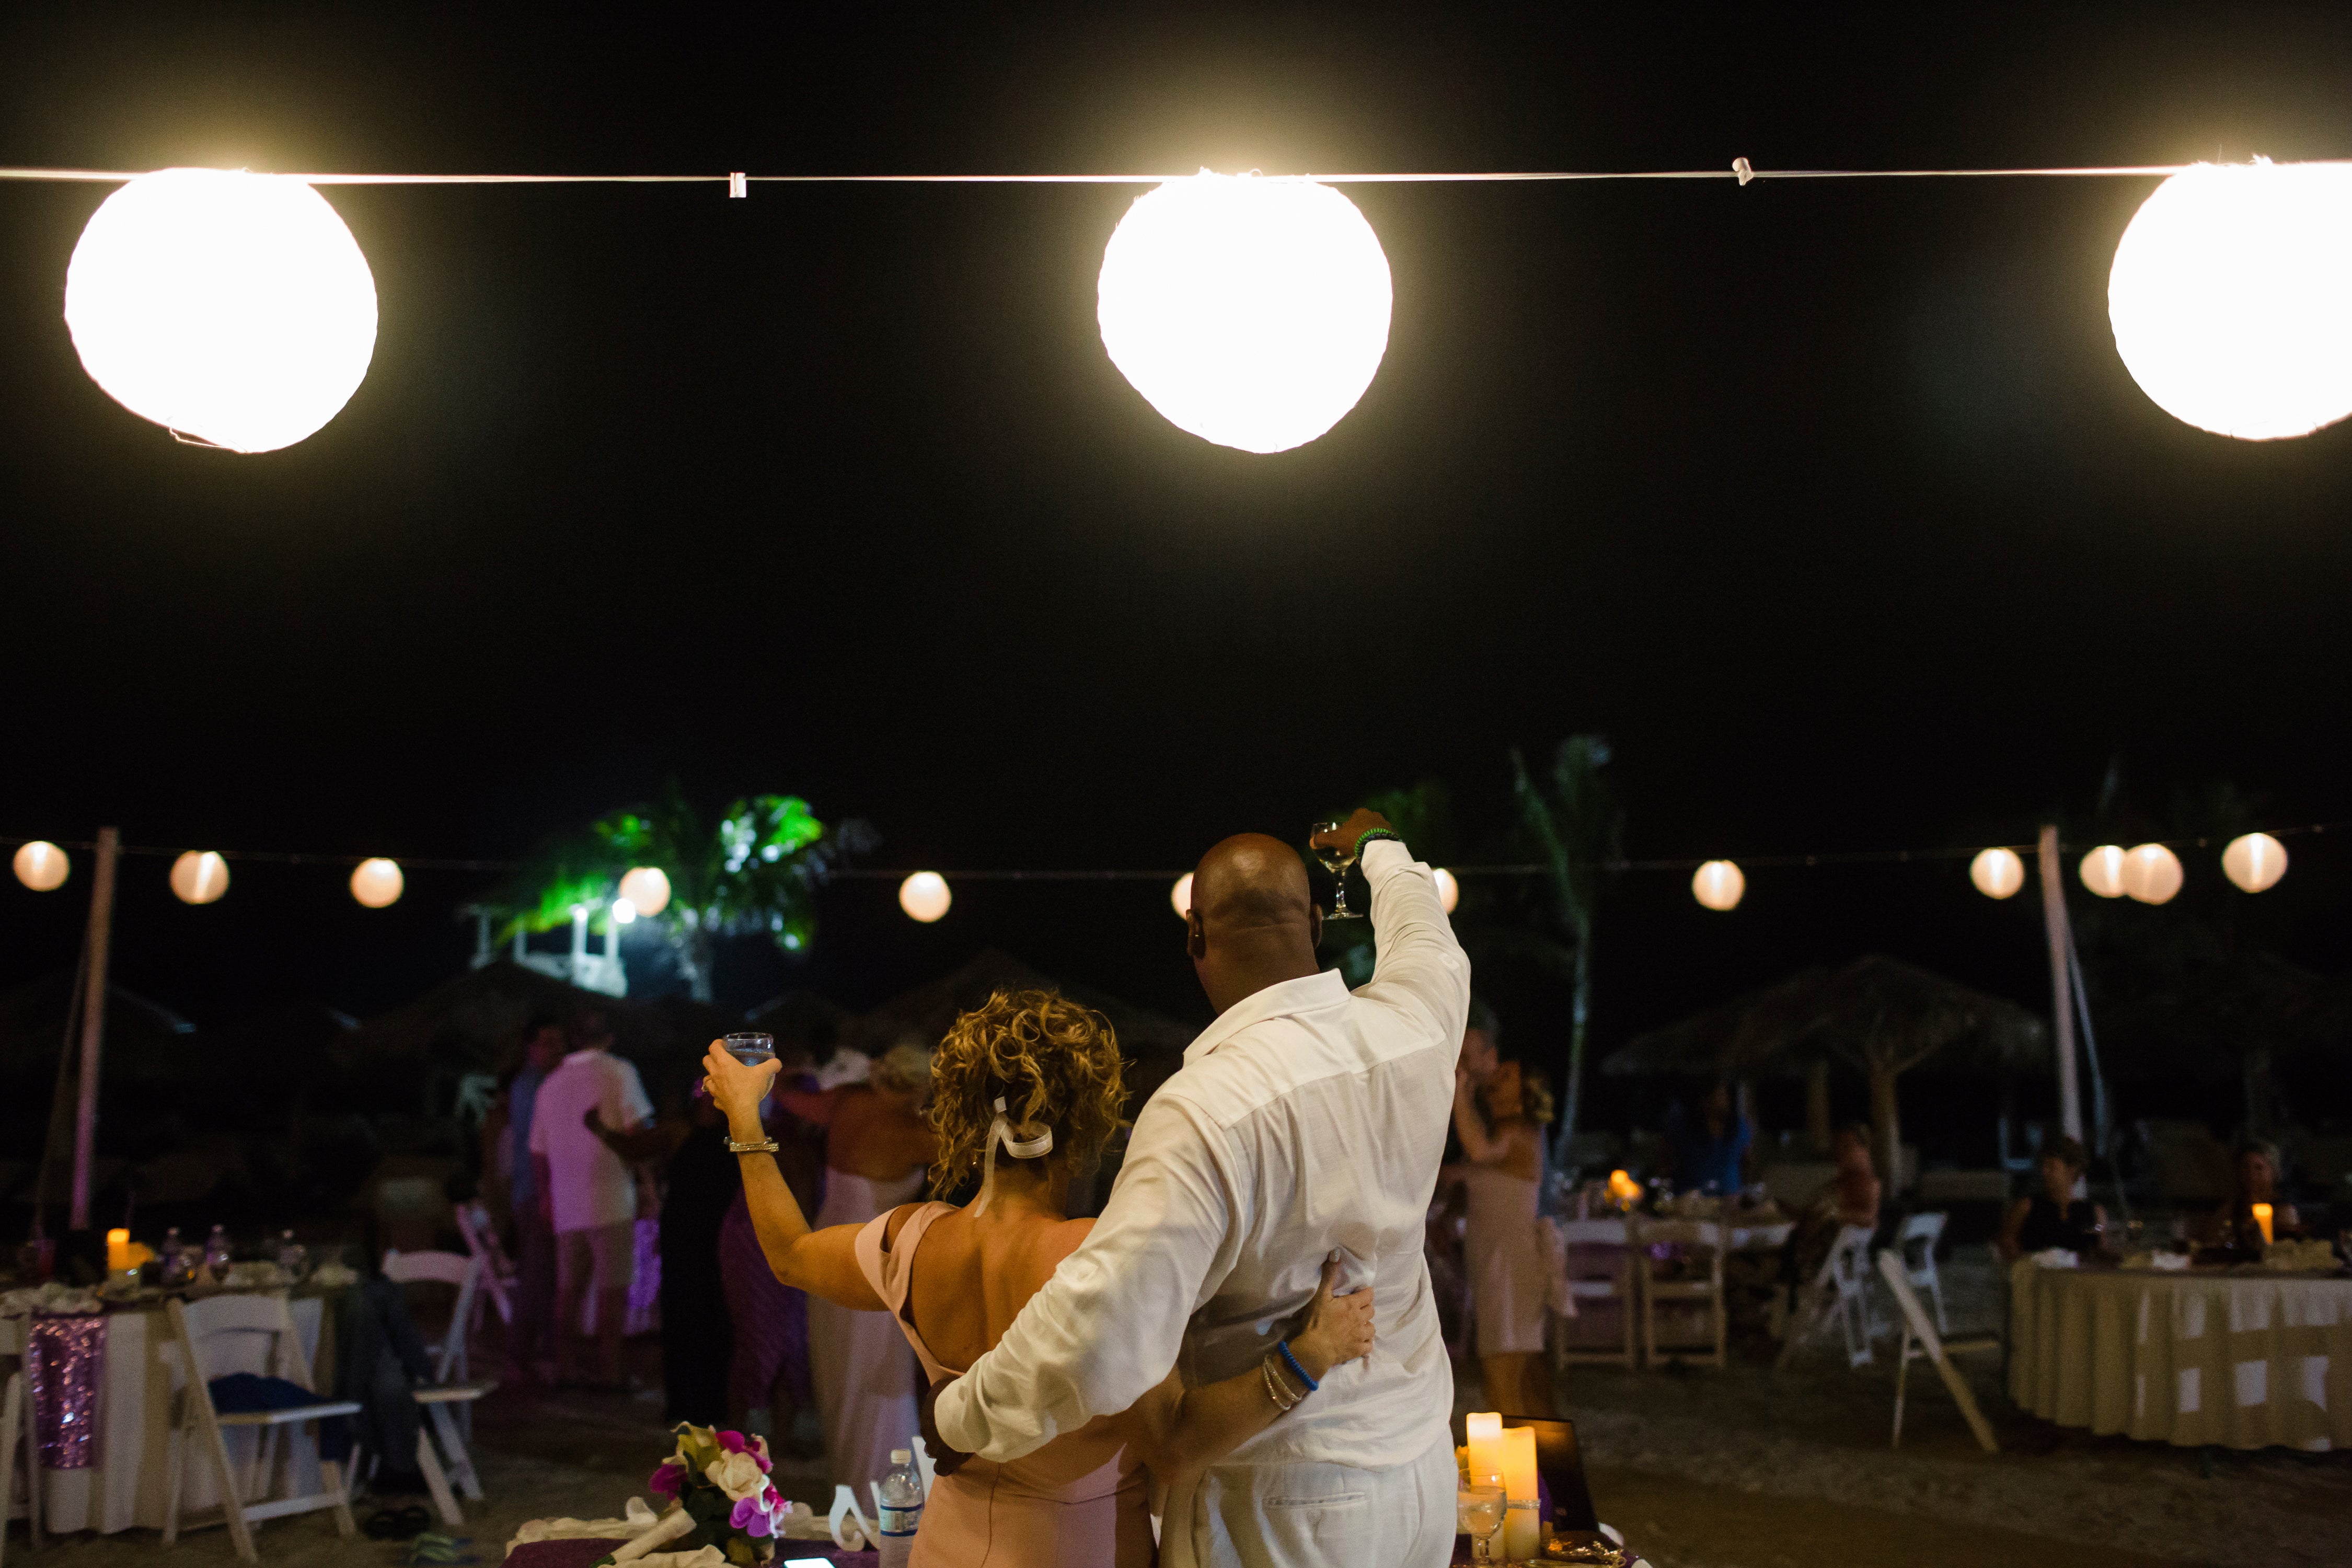 Everything You Need To Know About Planning A Destination Wedding In Jamaica